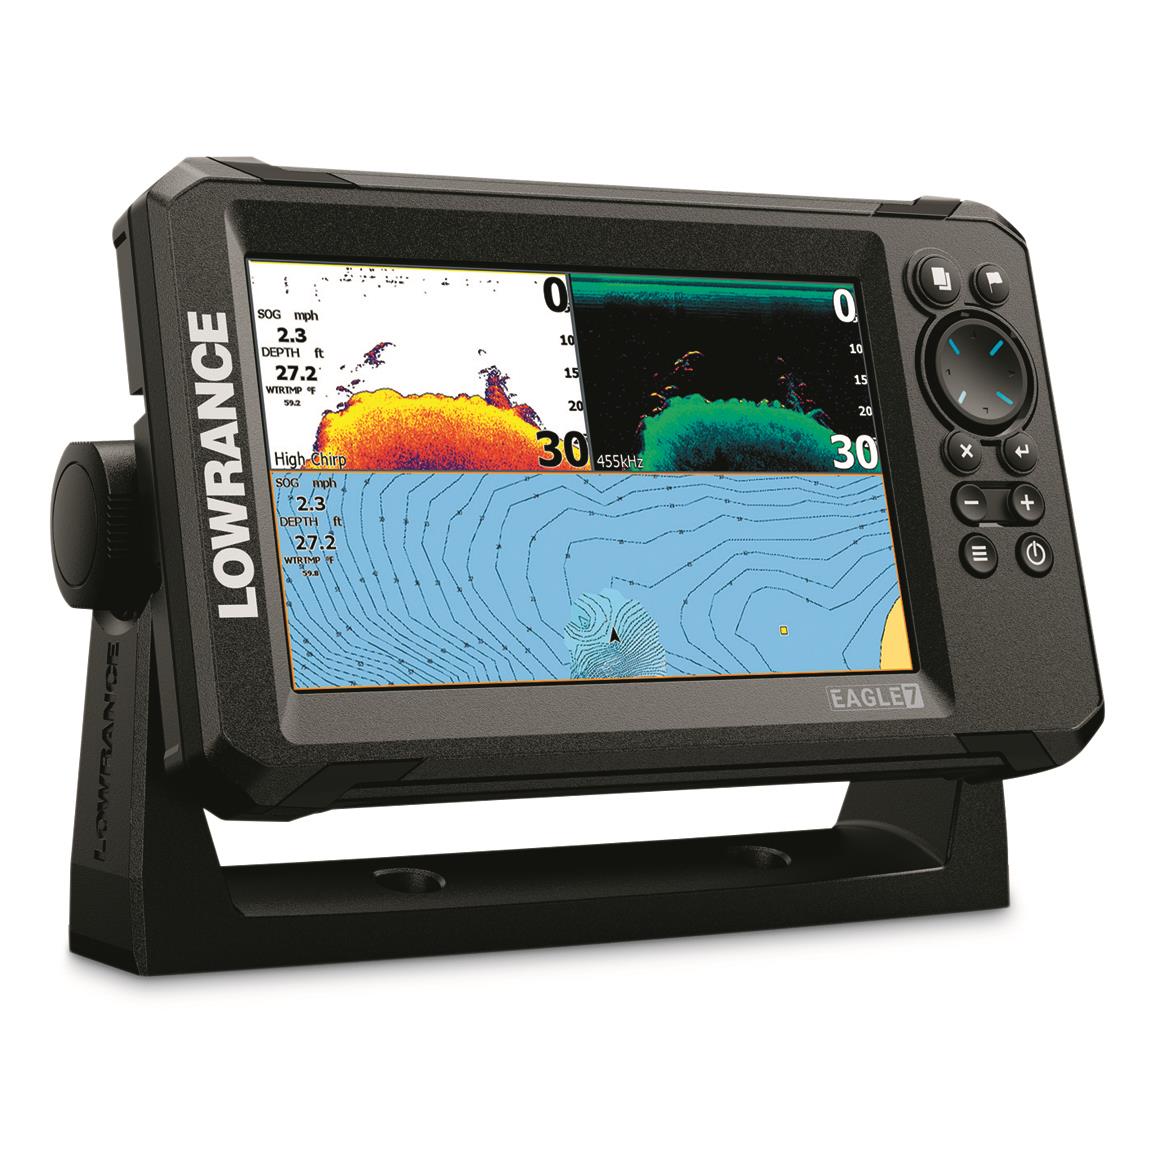 Lowrance Eagle 7 SplitShot Fishfinder with U.S. Inland Mapping - 740781,  Fish Finders at Sportsman's Guide